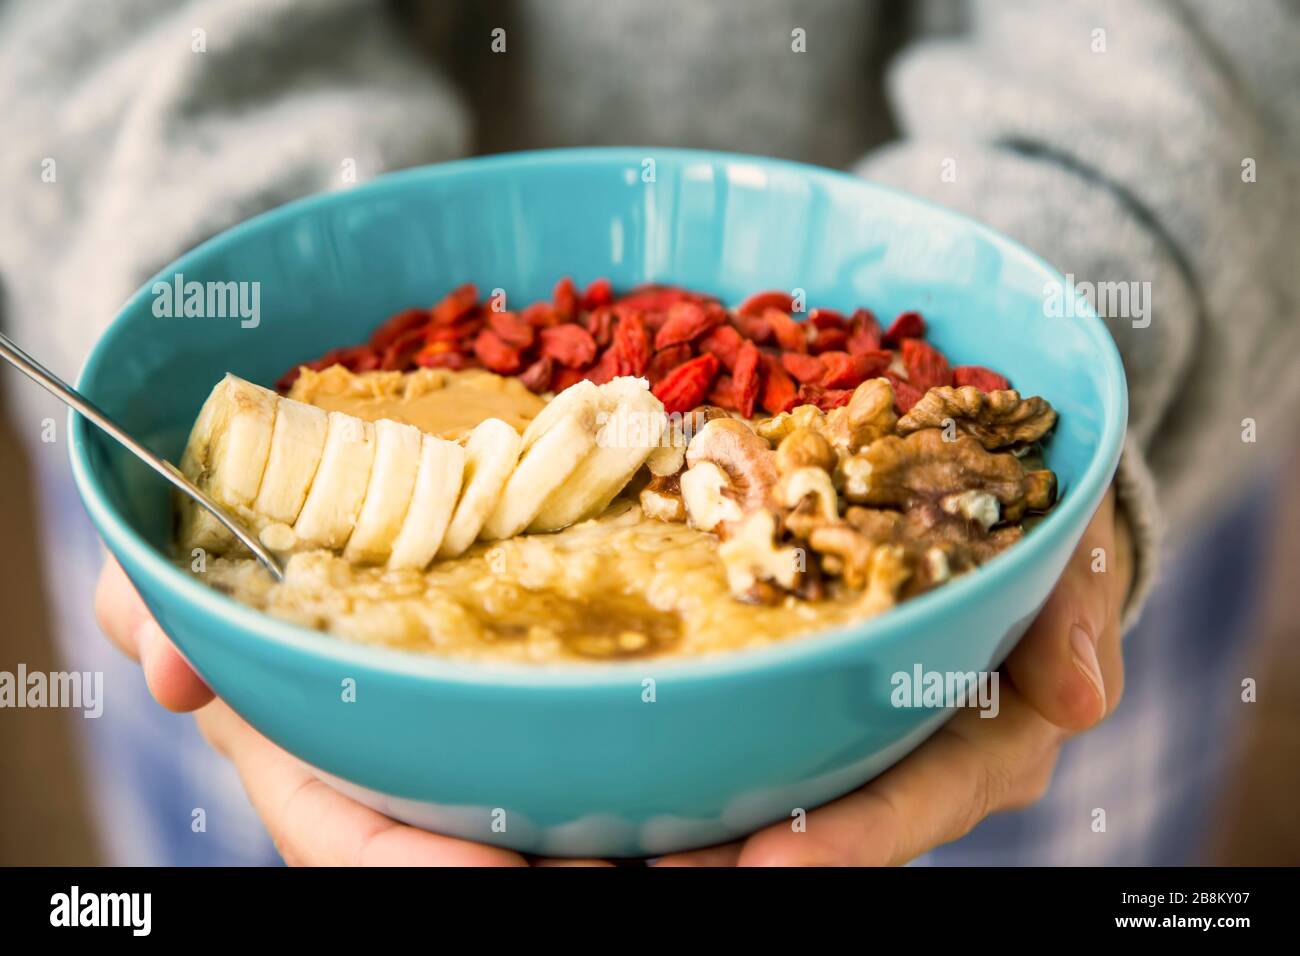 Porridge bowl in woman hands, front view of cozy warm winter healthy oatmeal with goji fruits and nuts Stock Photo